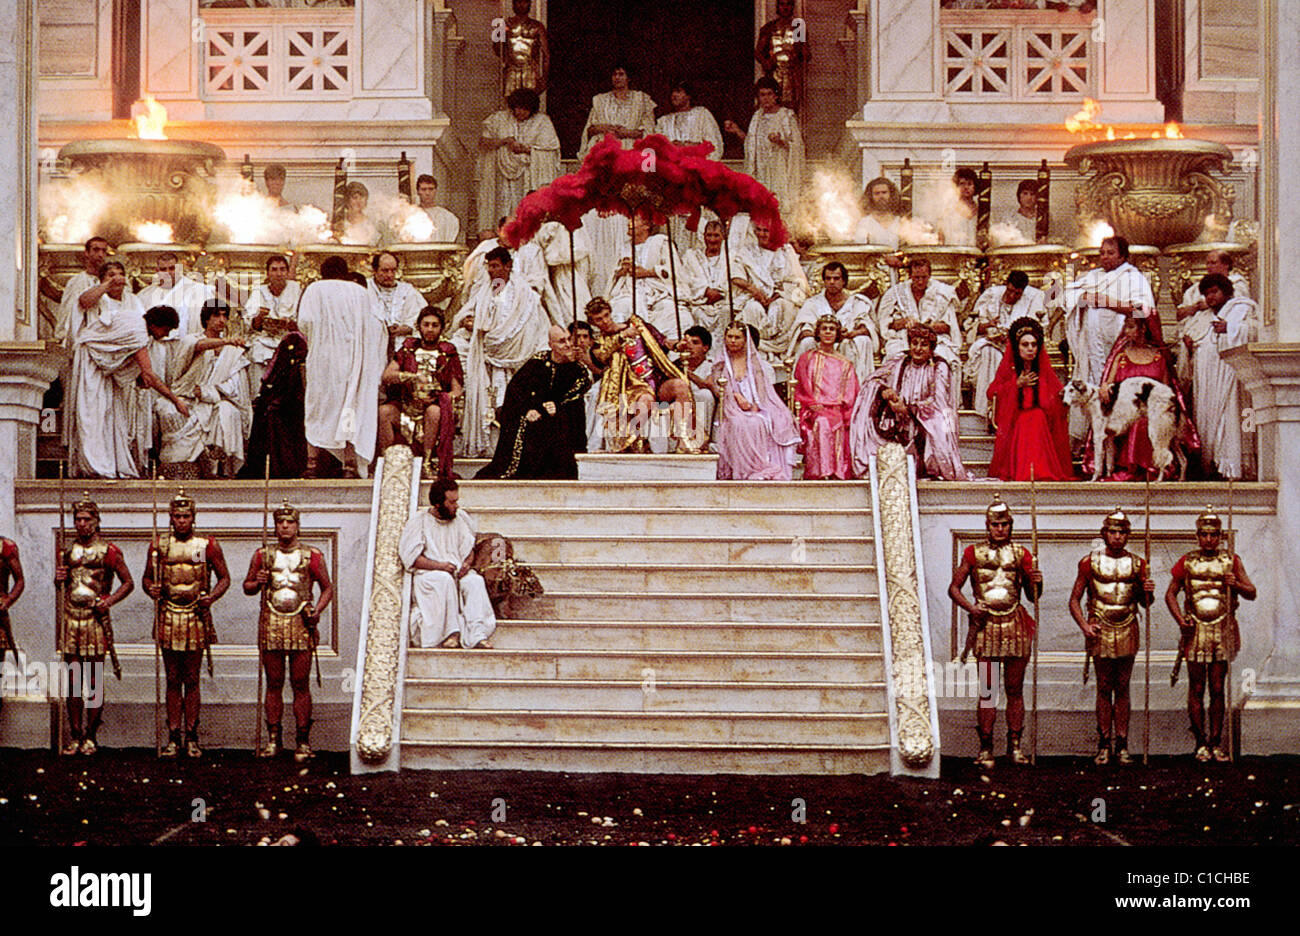 CALIGULA, mon fils (1979) MALCOLM MCDOWELL TINTO BRASS (DIR) CLGL FOH COLLECTION MOVIESTORE 011LTD Banque D'Images